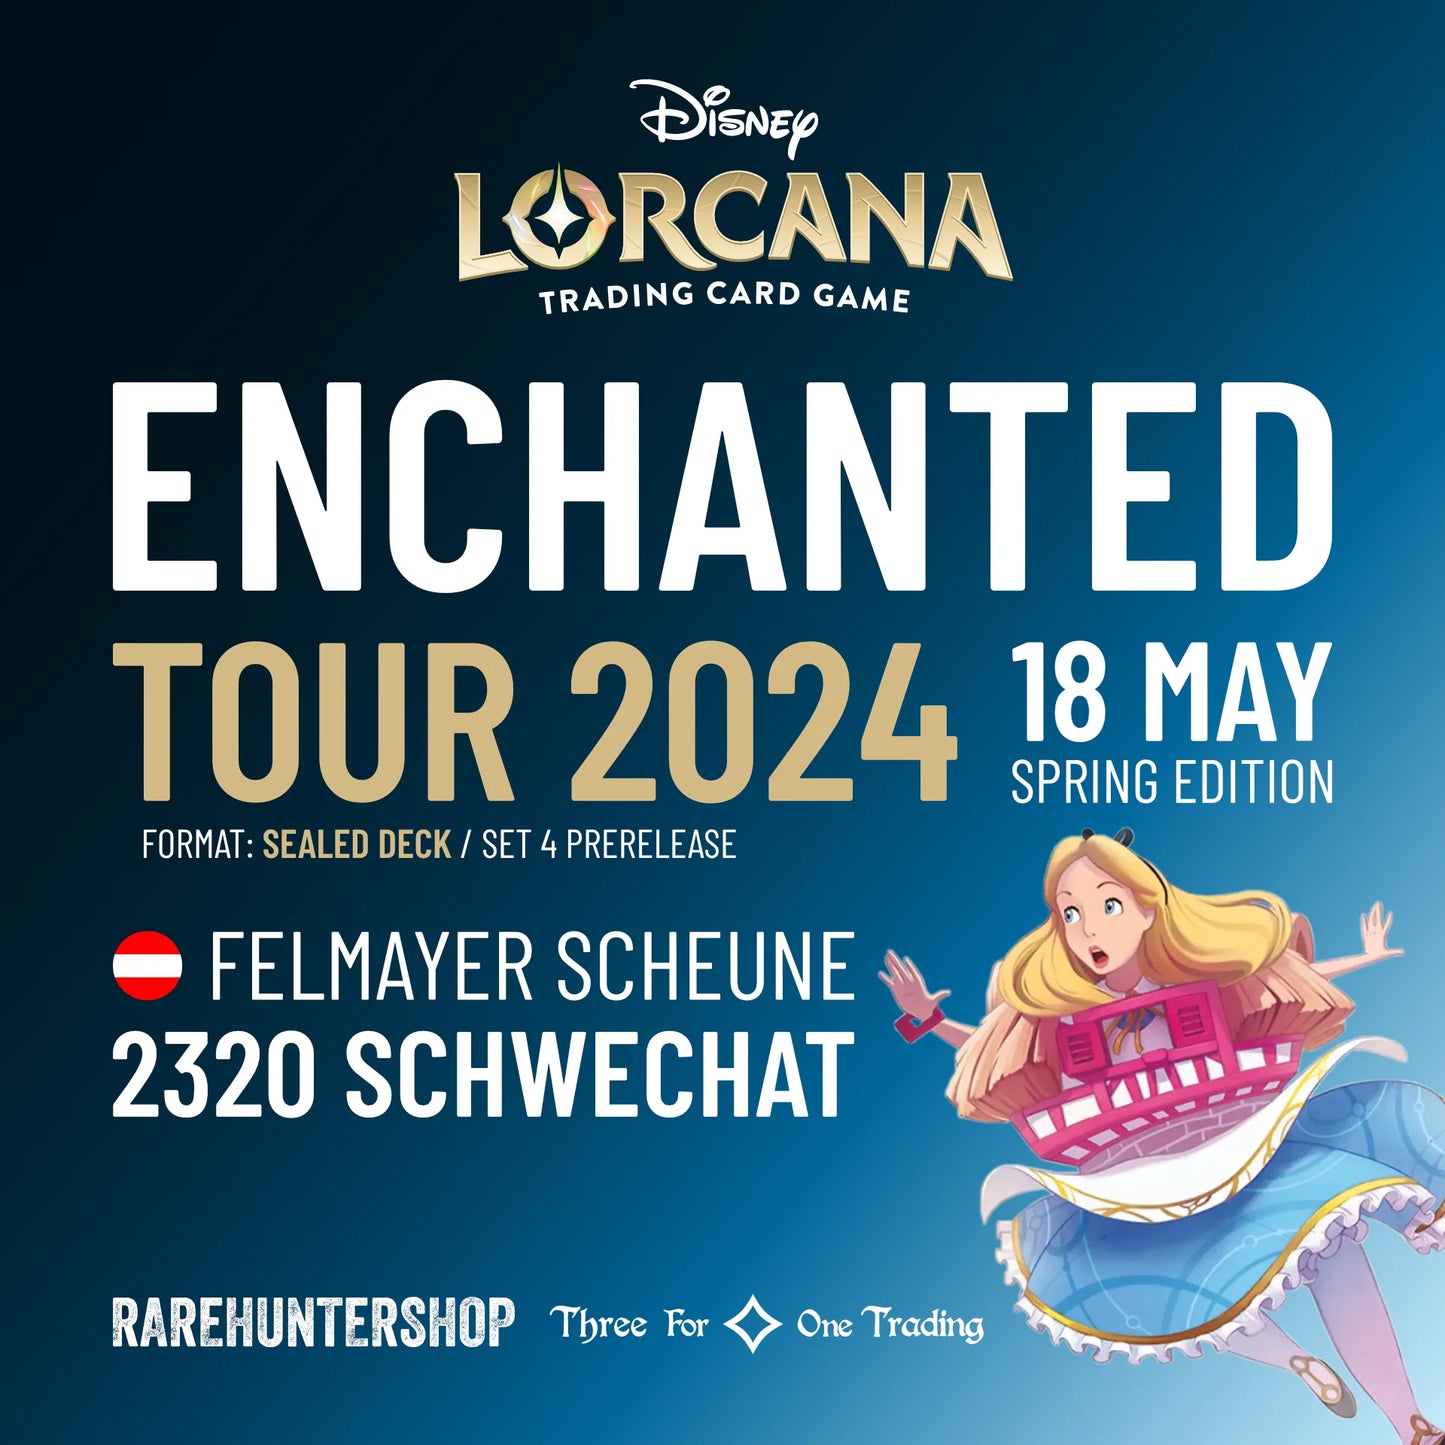 ENCHANTED TOUR 2024 - Spring Edition (Ticket)